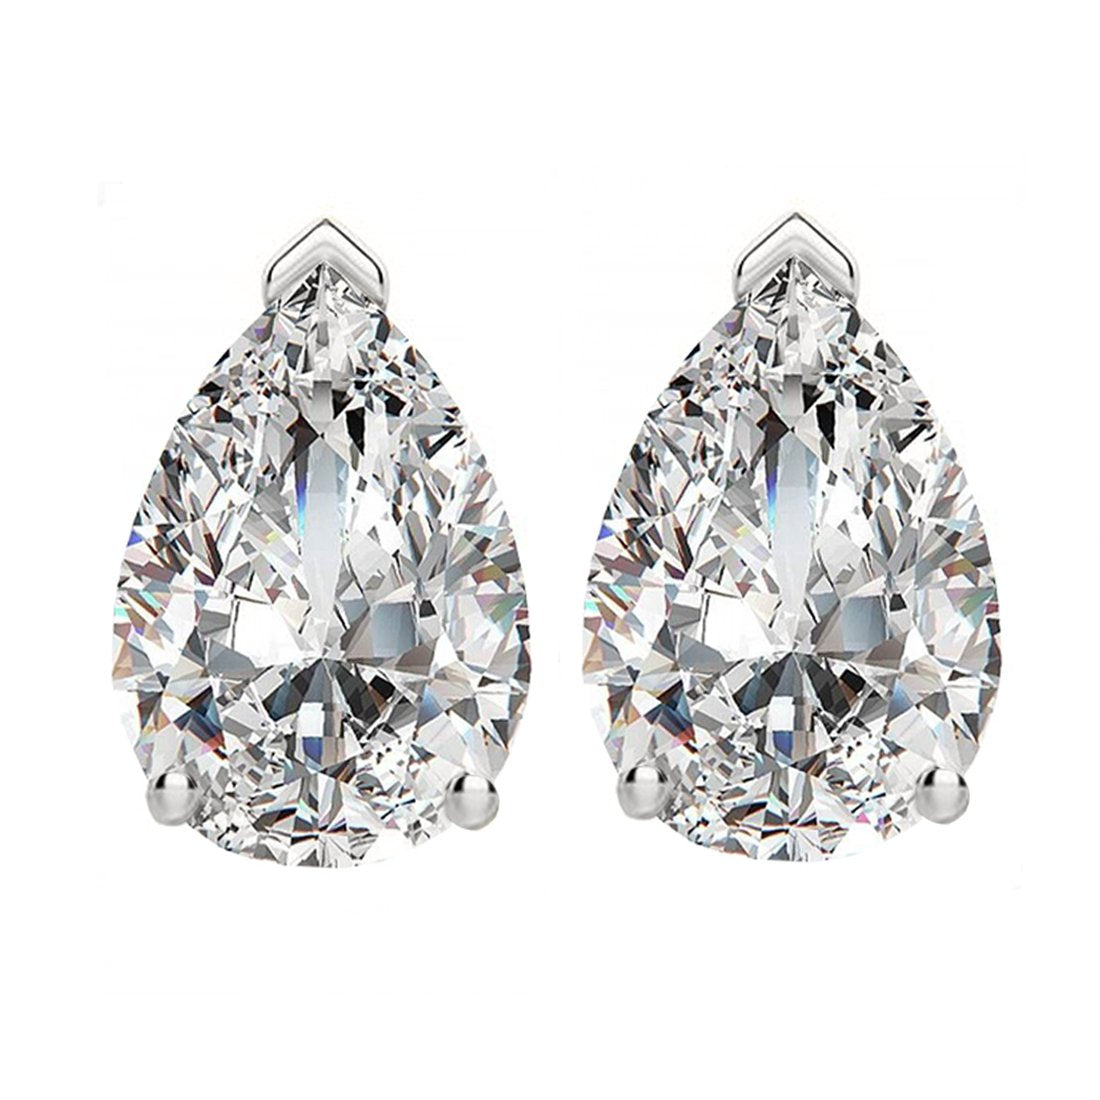 PLATINUM 950 PEAR. Choose From 0.25 CTW To 10.00 CTW